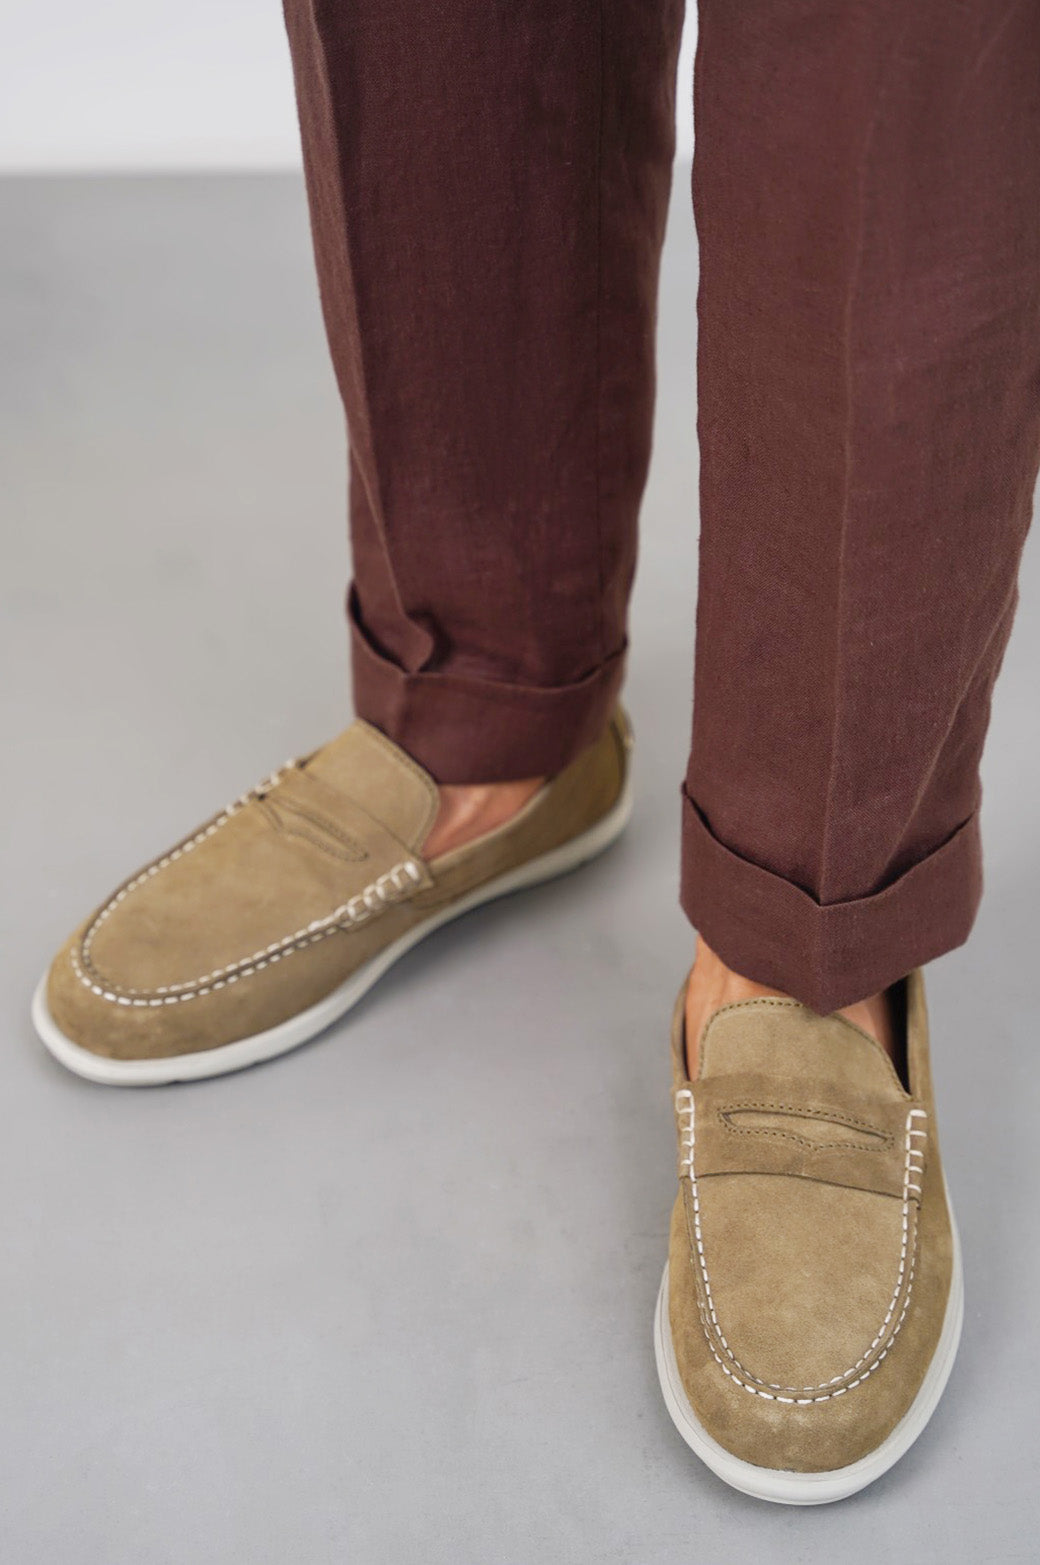 OLIVE LIGHTWEIGHT SUEDE LOAFERS